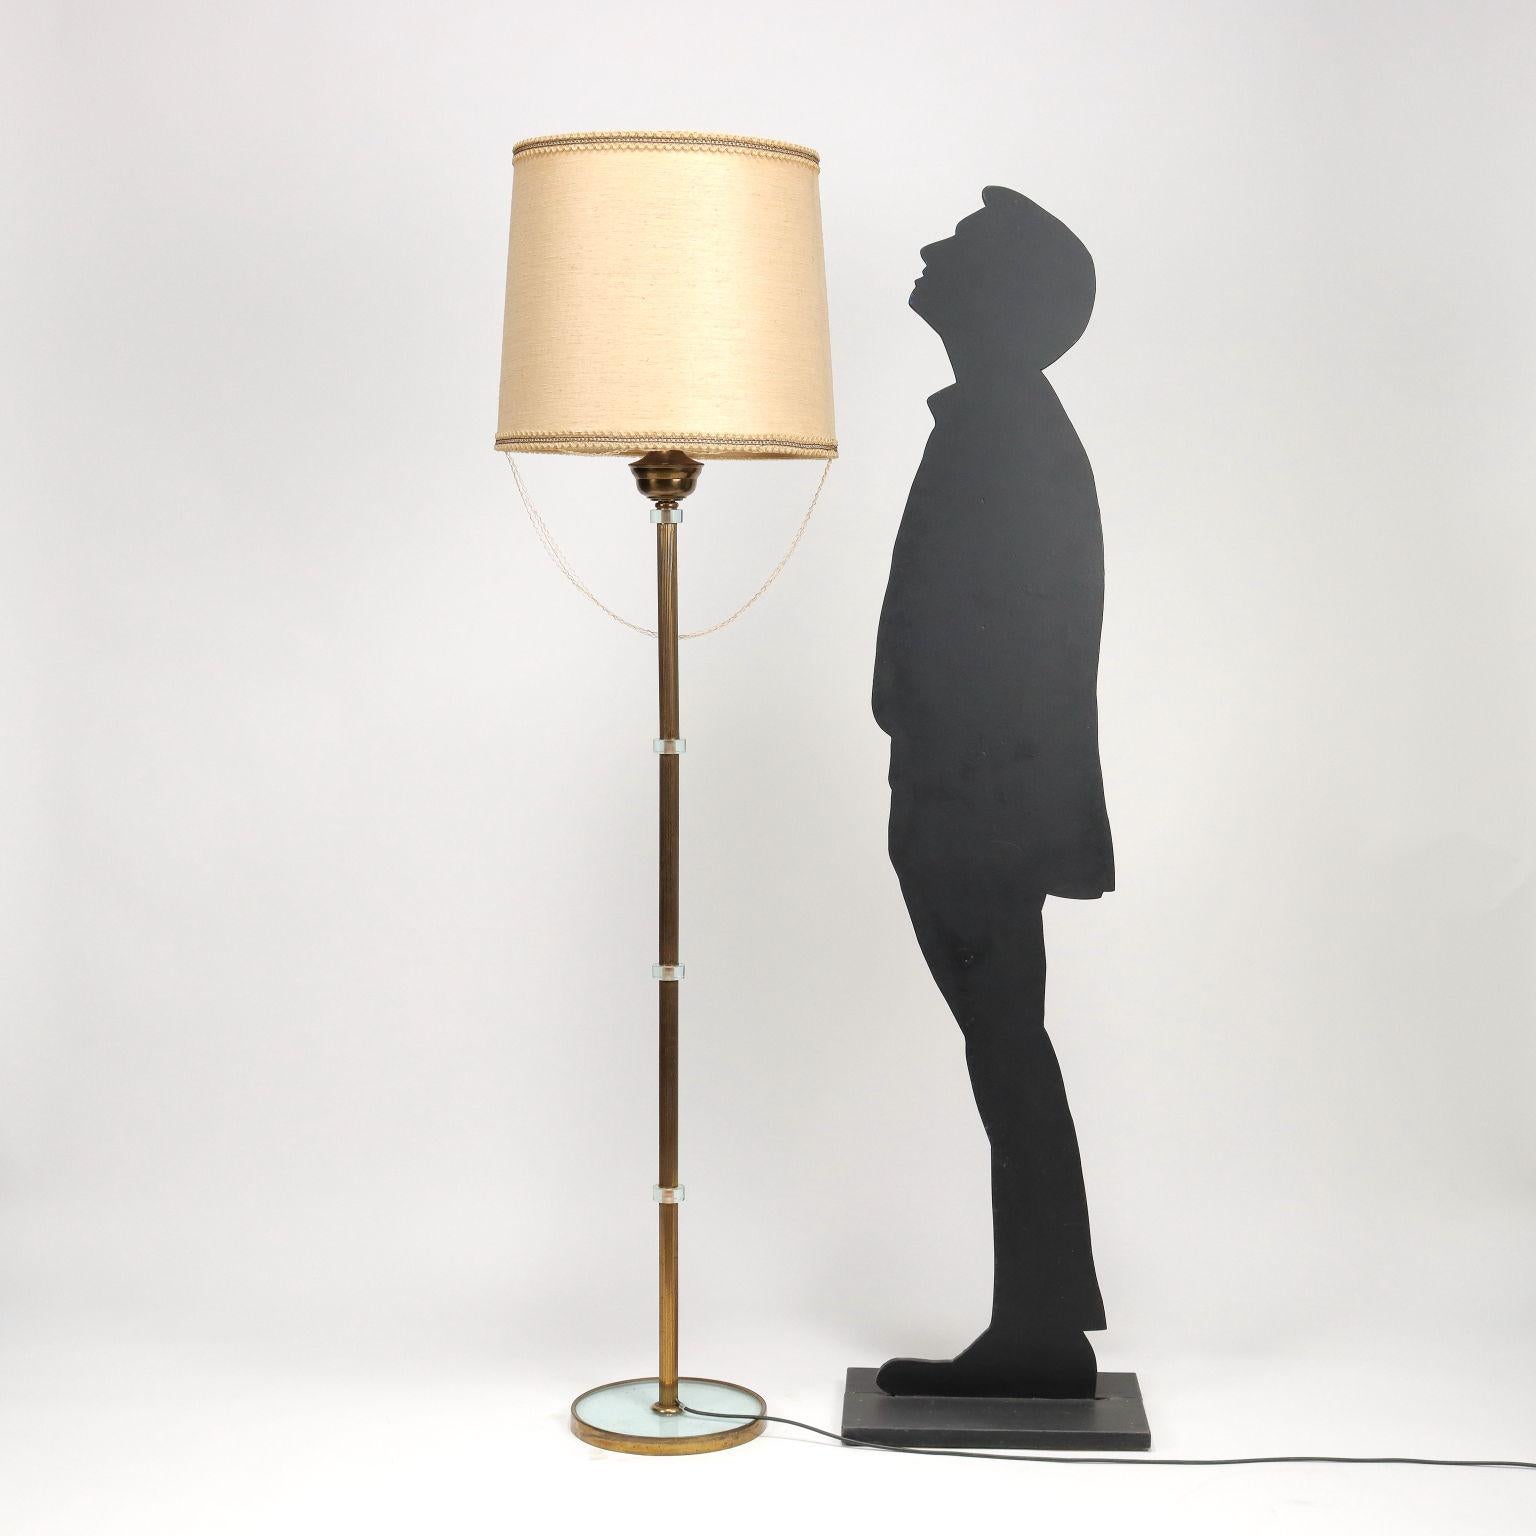 Floor lamp, Brass, glass, fabric shade. Good condition, shows small signs of wear.